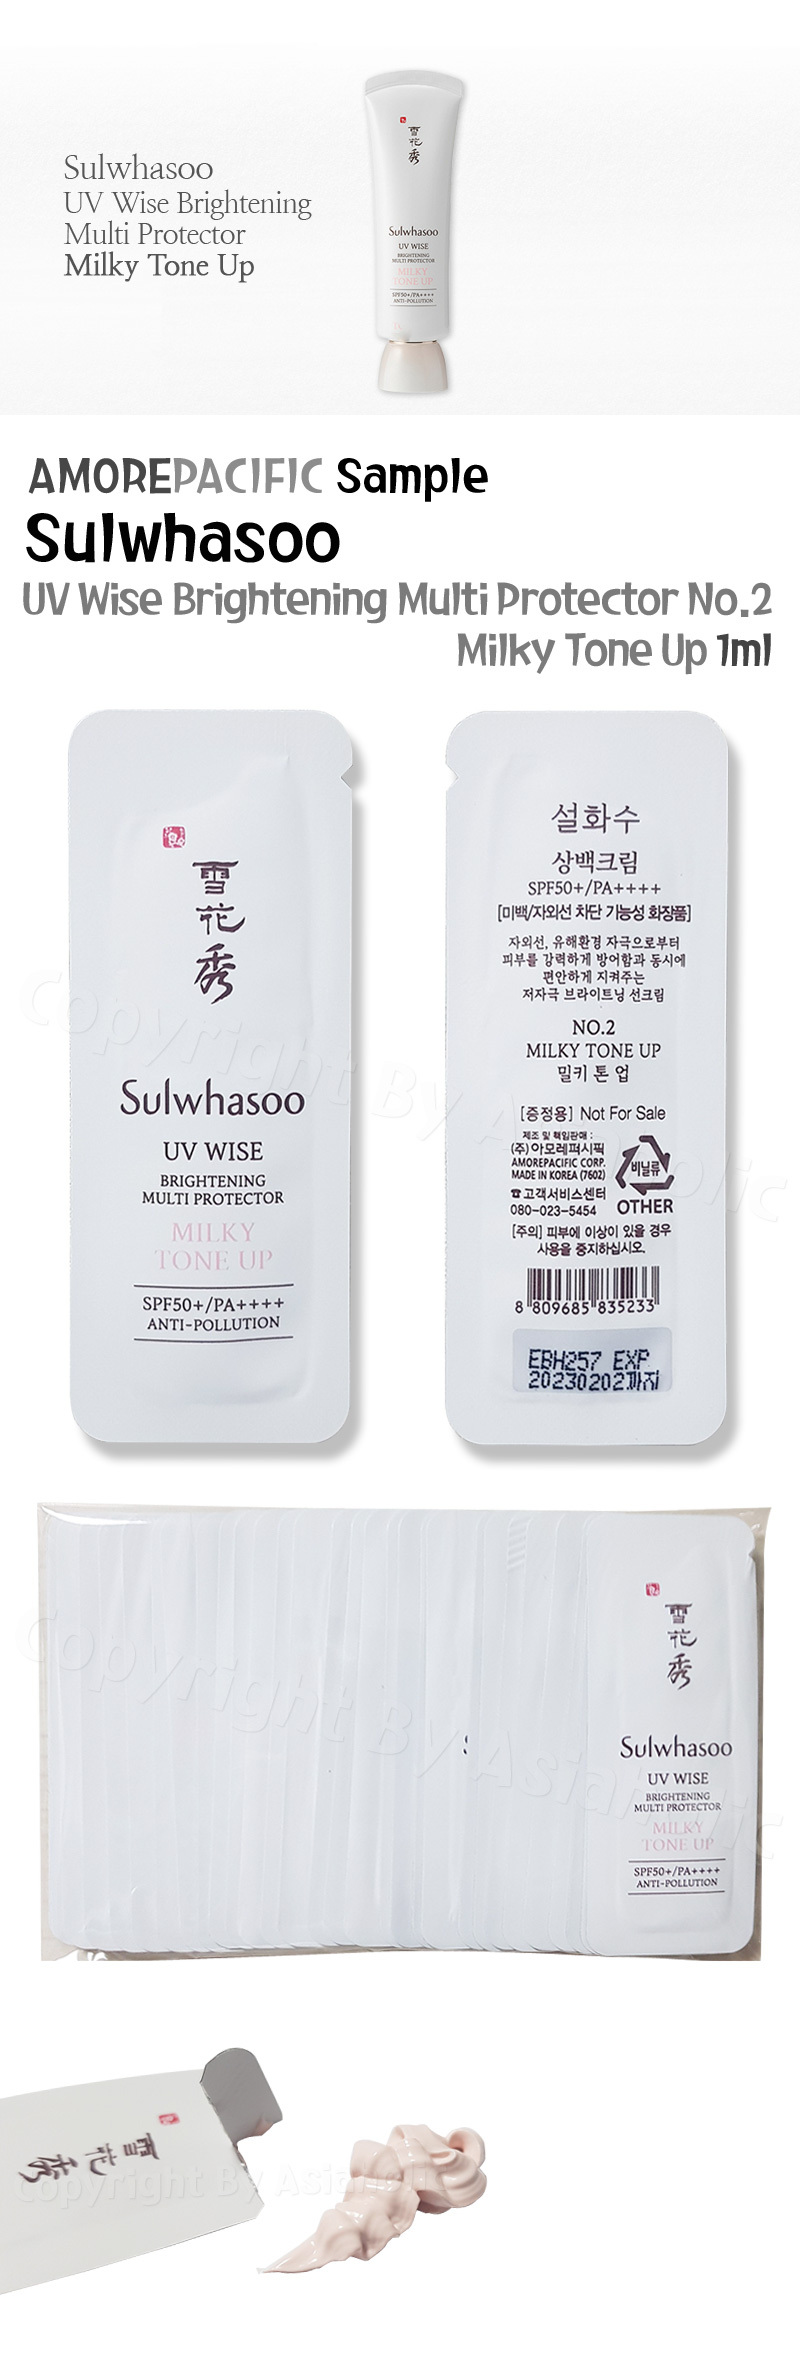 Sulwhasoo UV Wise Brightening Multi Protector No.2 Milky Tone Up 1ml x 10pcs (10ml) Sample Newest Version